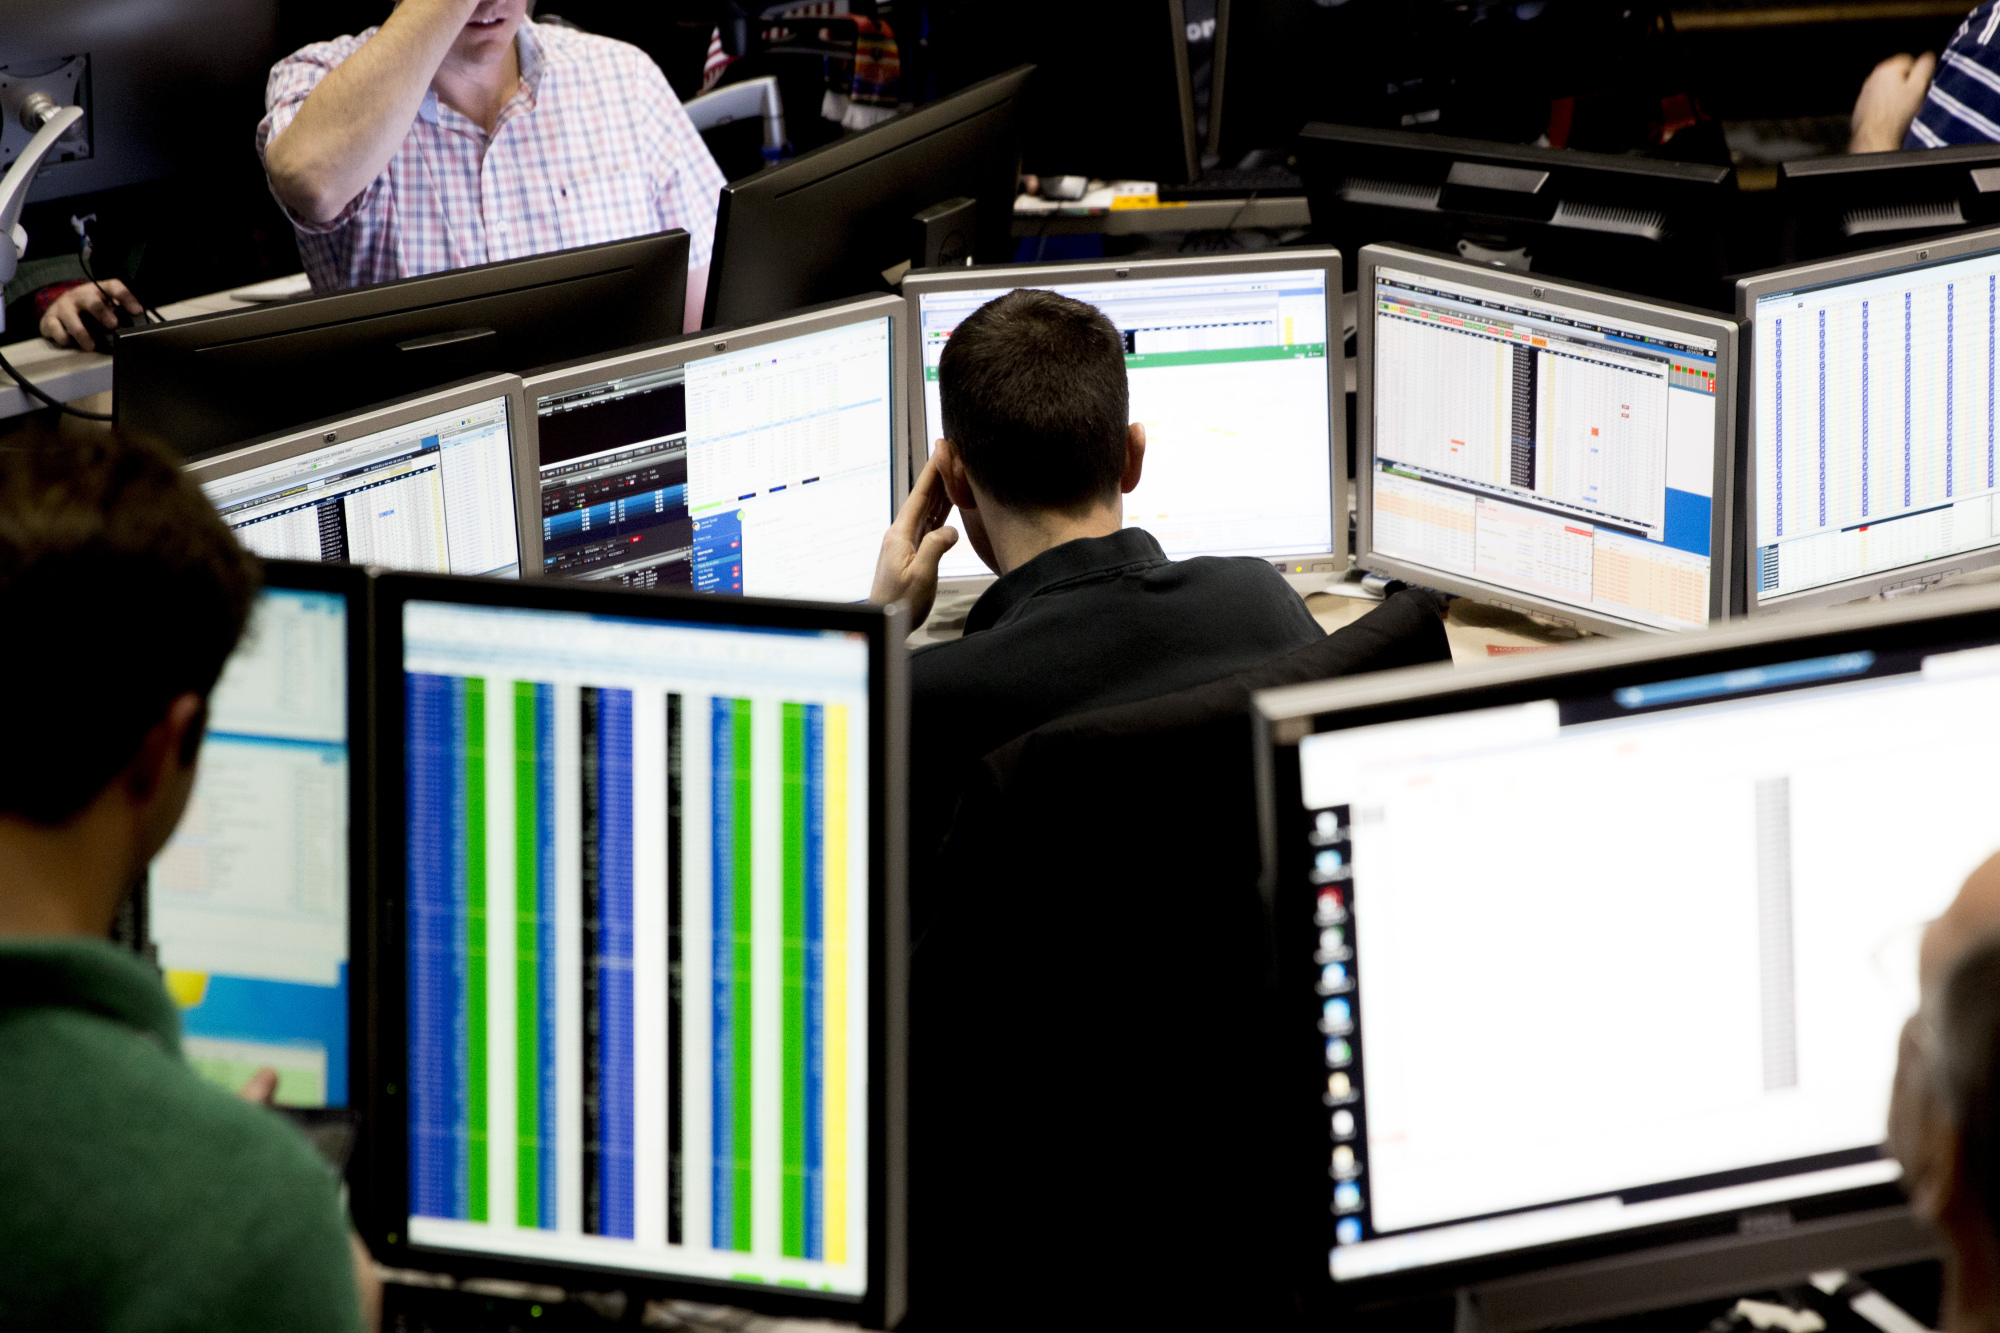 A trader looks over computer monitors as he works in the Cboe Volatility Index (VIX) pit on the floor of the Cboe Global Markets, Inc. exchange in Chicago, Illinois/